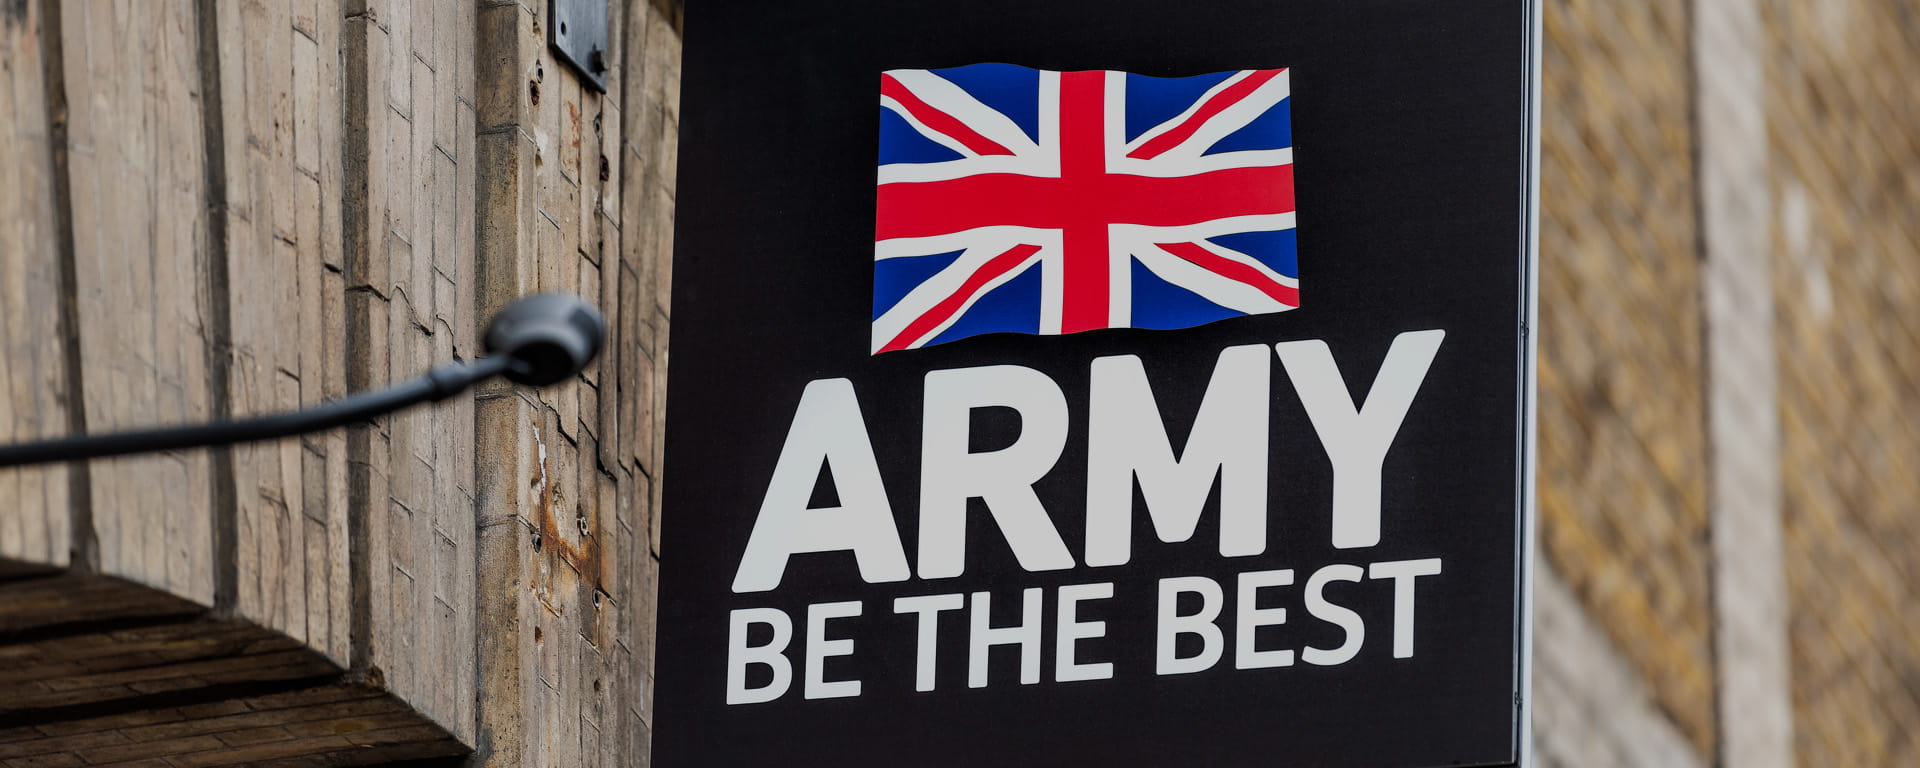 Signage on a wall for UK Army with slogan 'Be the best'